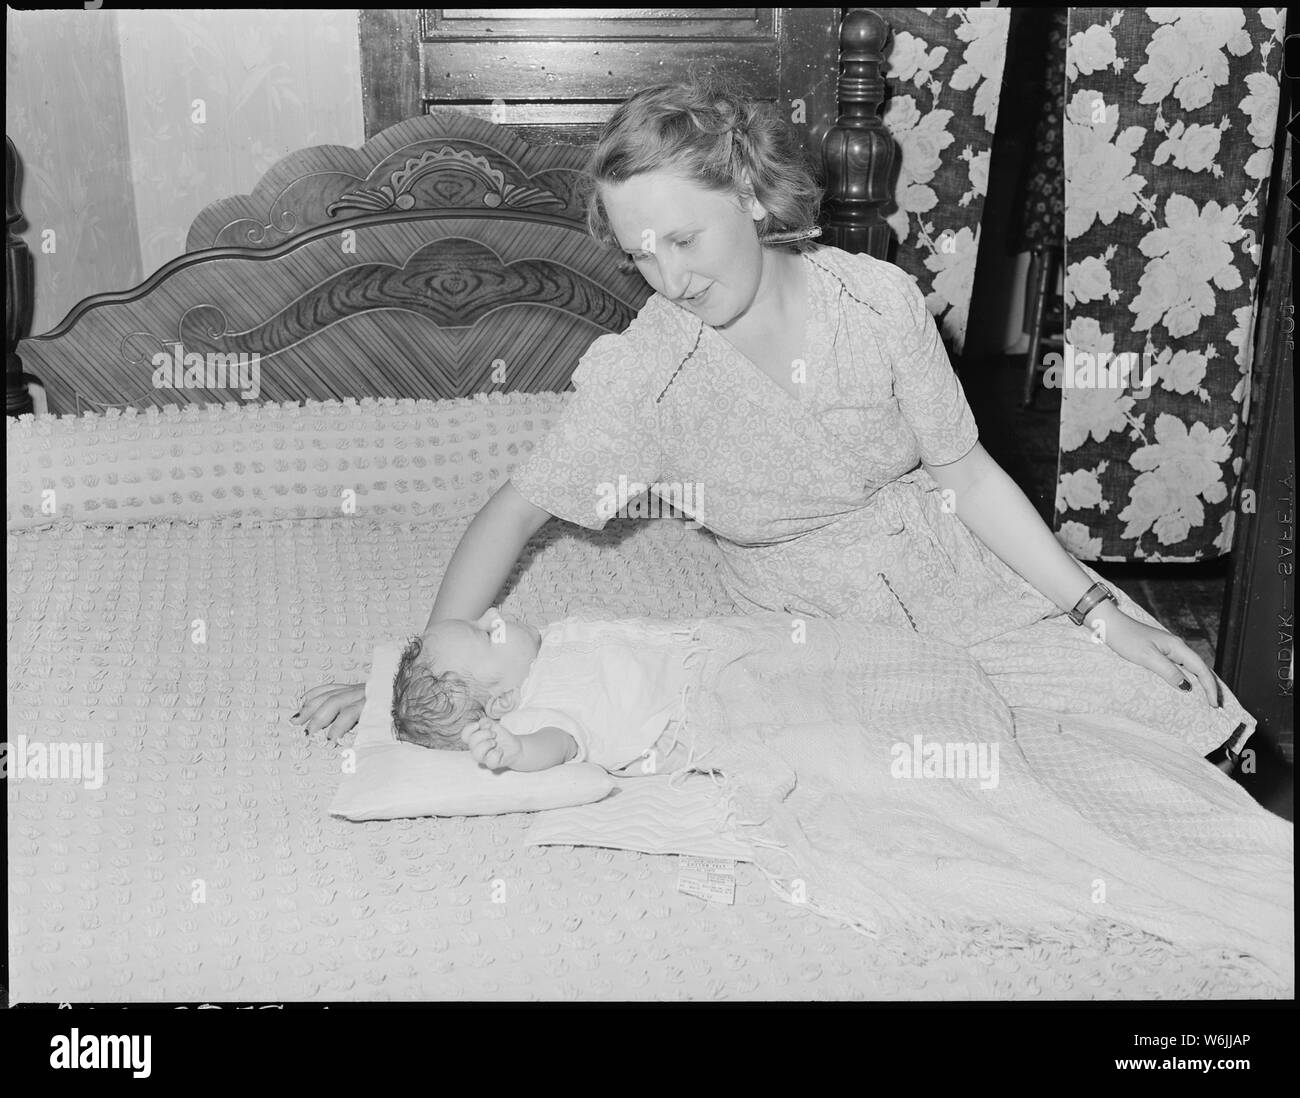 Baby ruth Black and White Stock Photos & Images - Alamy